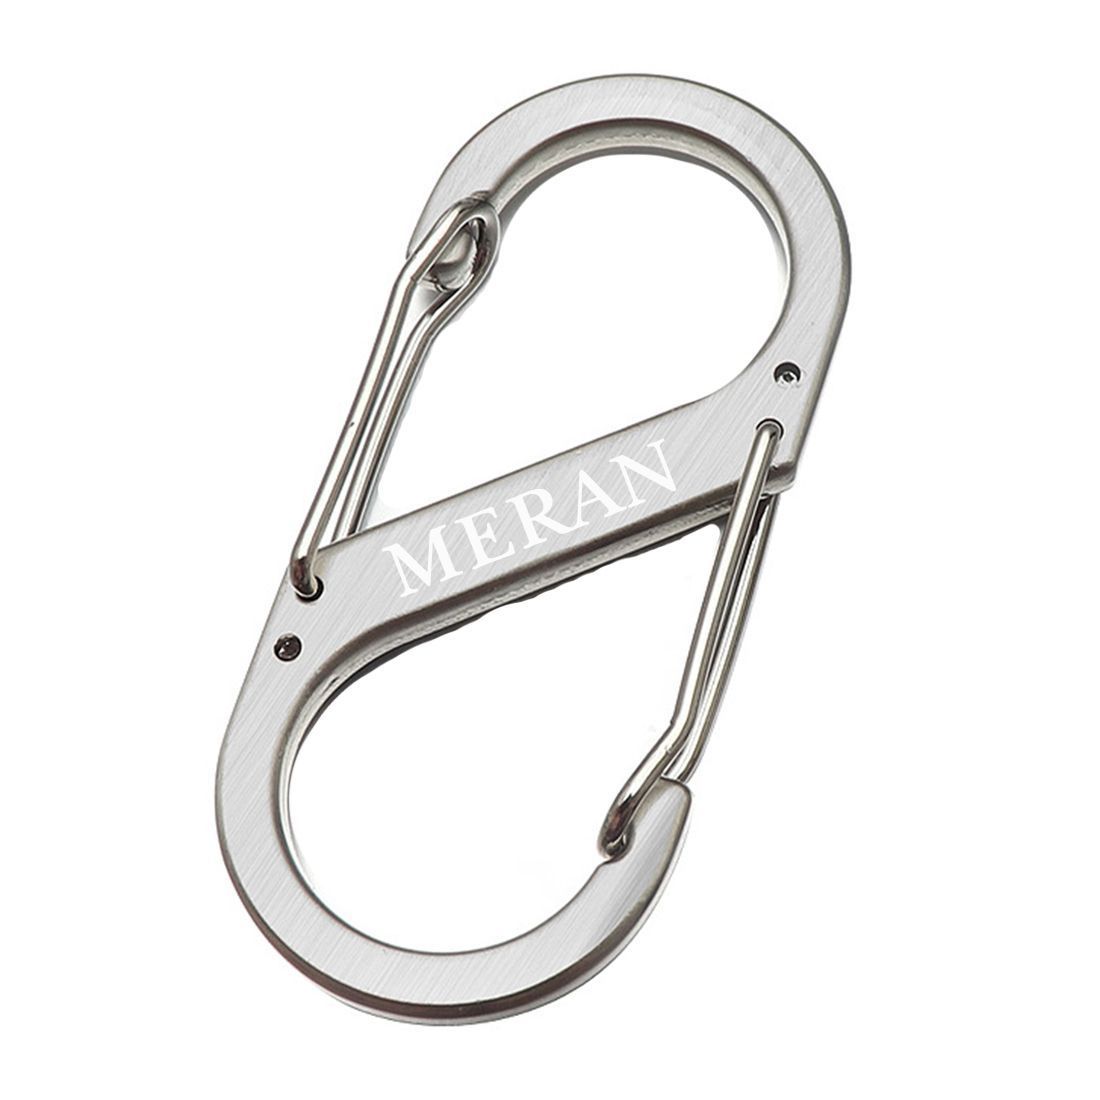 S Carabiner,Black Double Sided S biner Keychain 6 Pieces Stainless